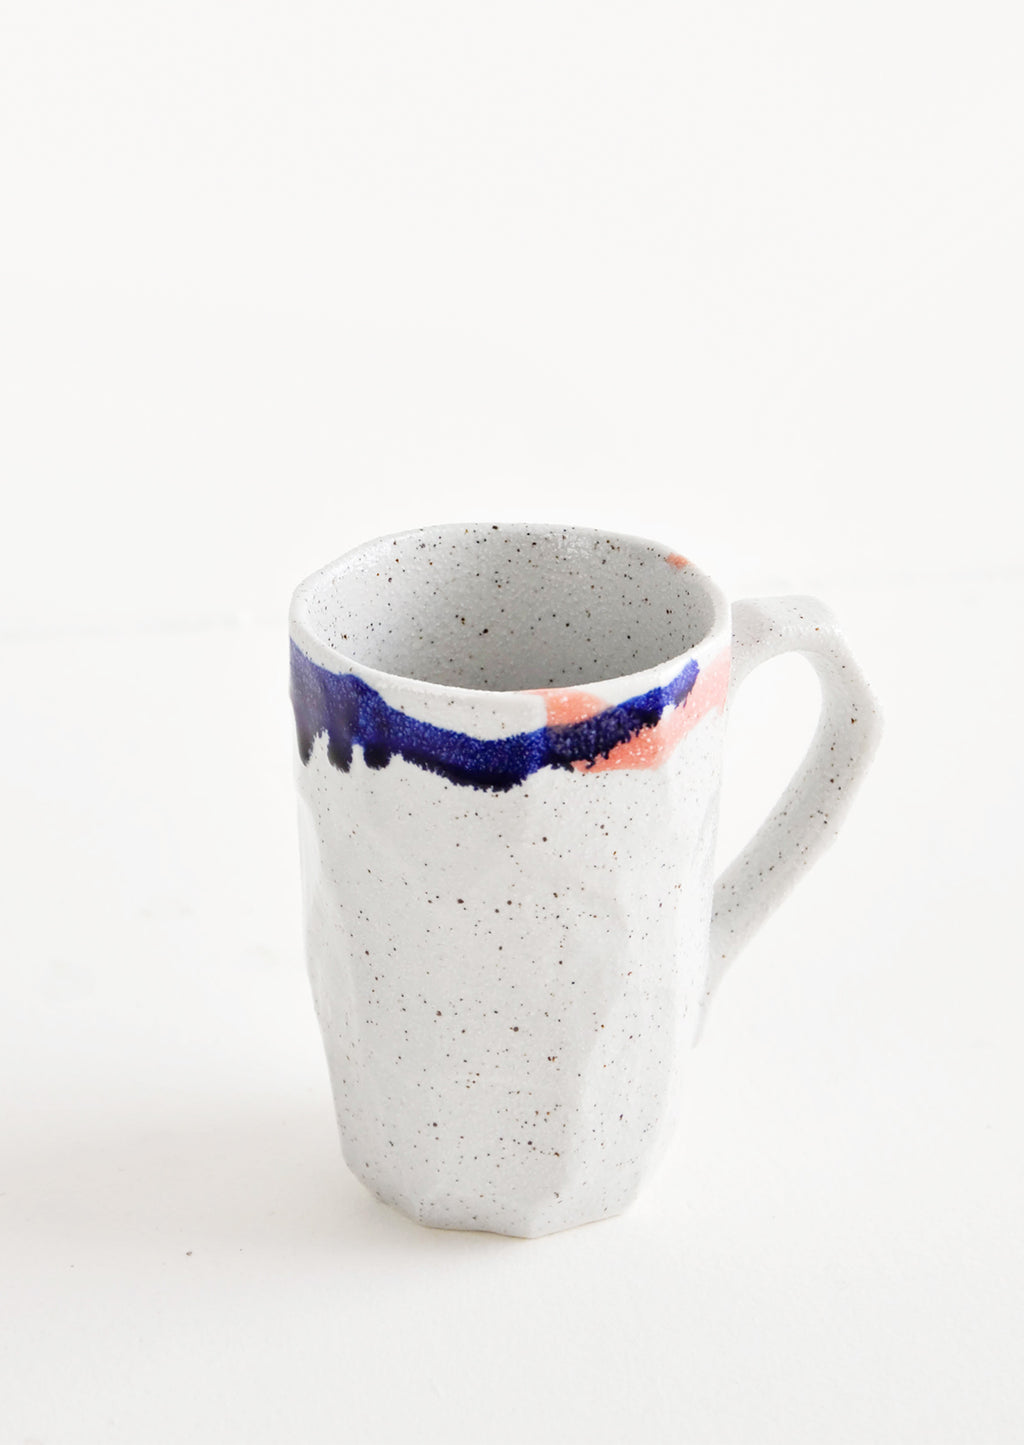 12 oz [$24.00]: A tall gray ceramic mug with blue, green, and pink painted rims.